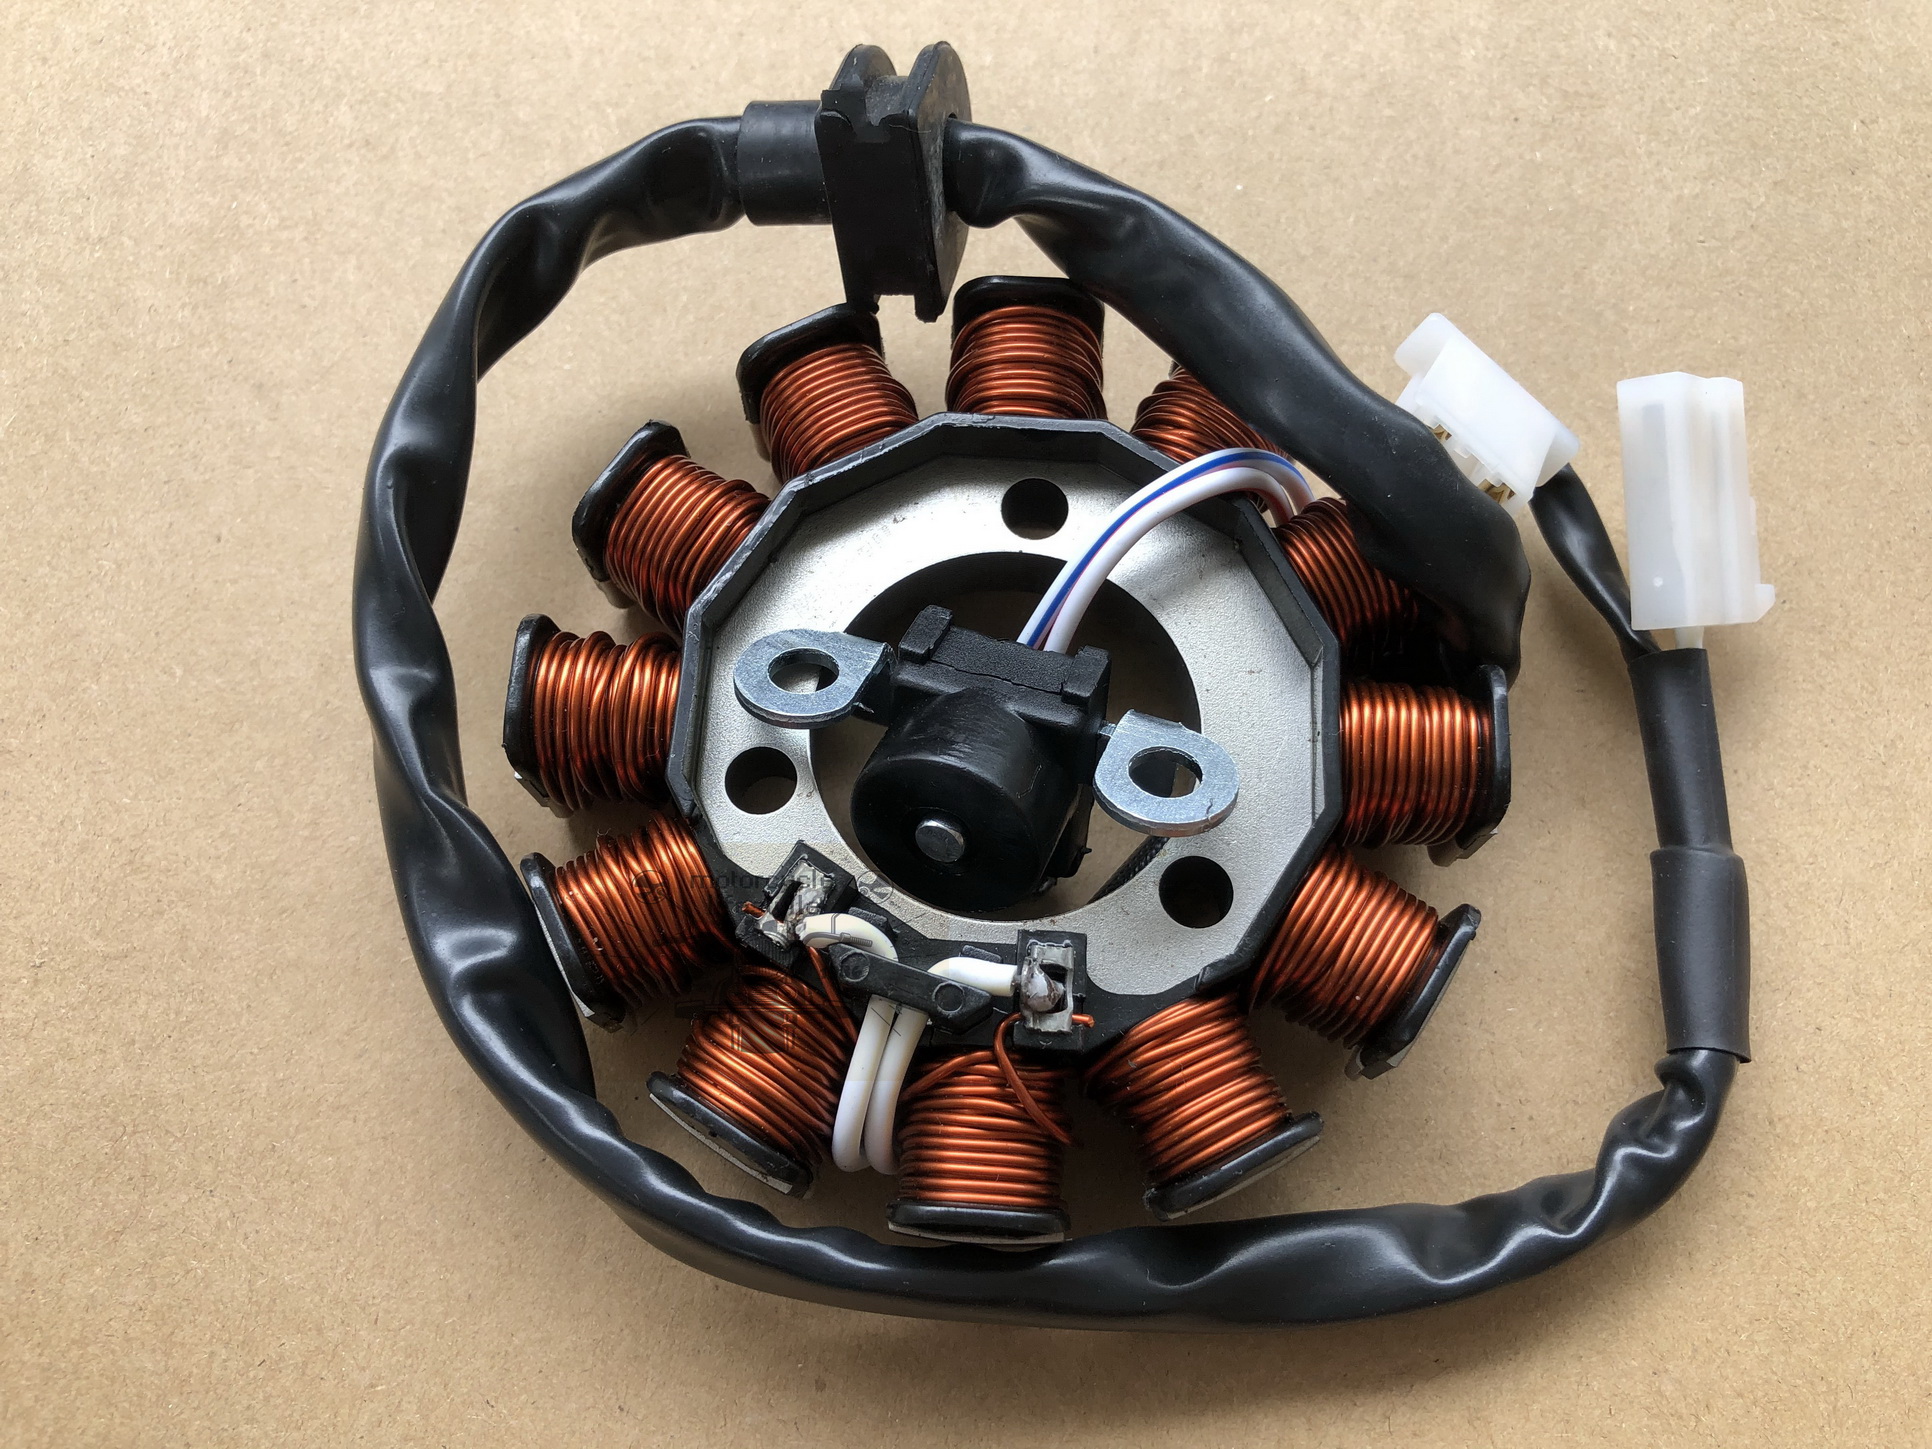 Motorcycle Stator Use | Reviewmotors.co